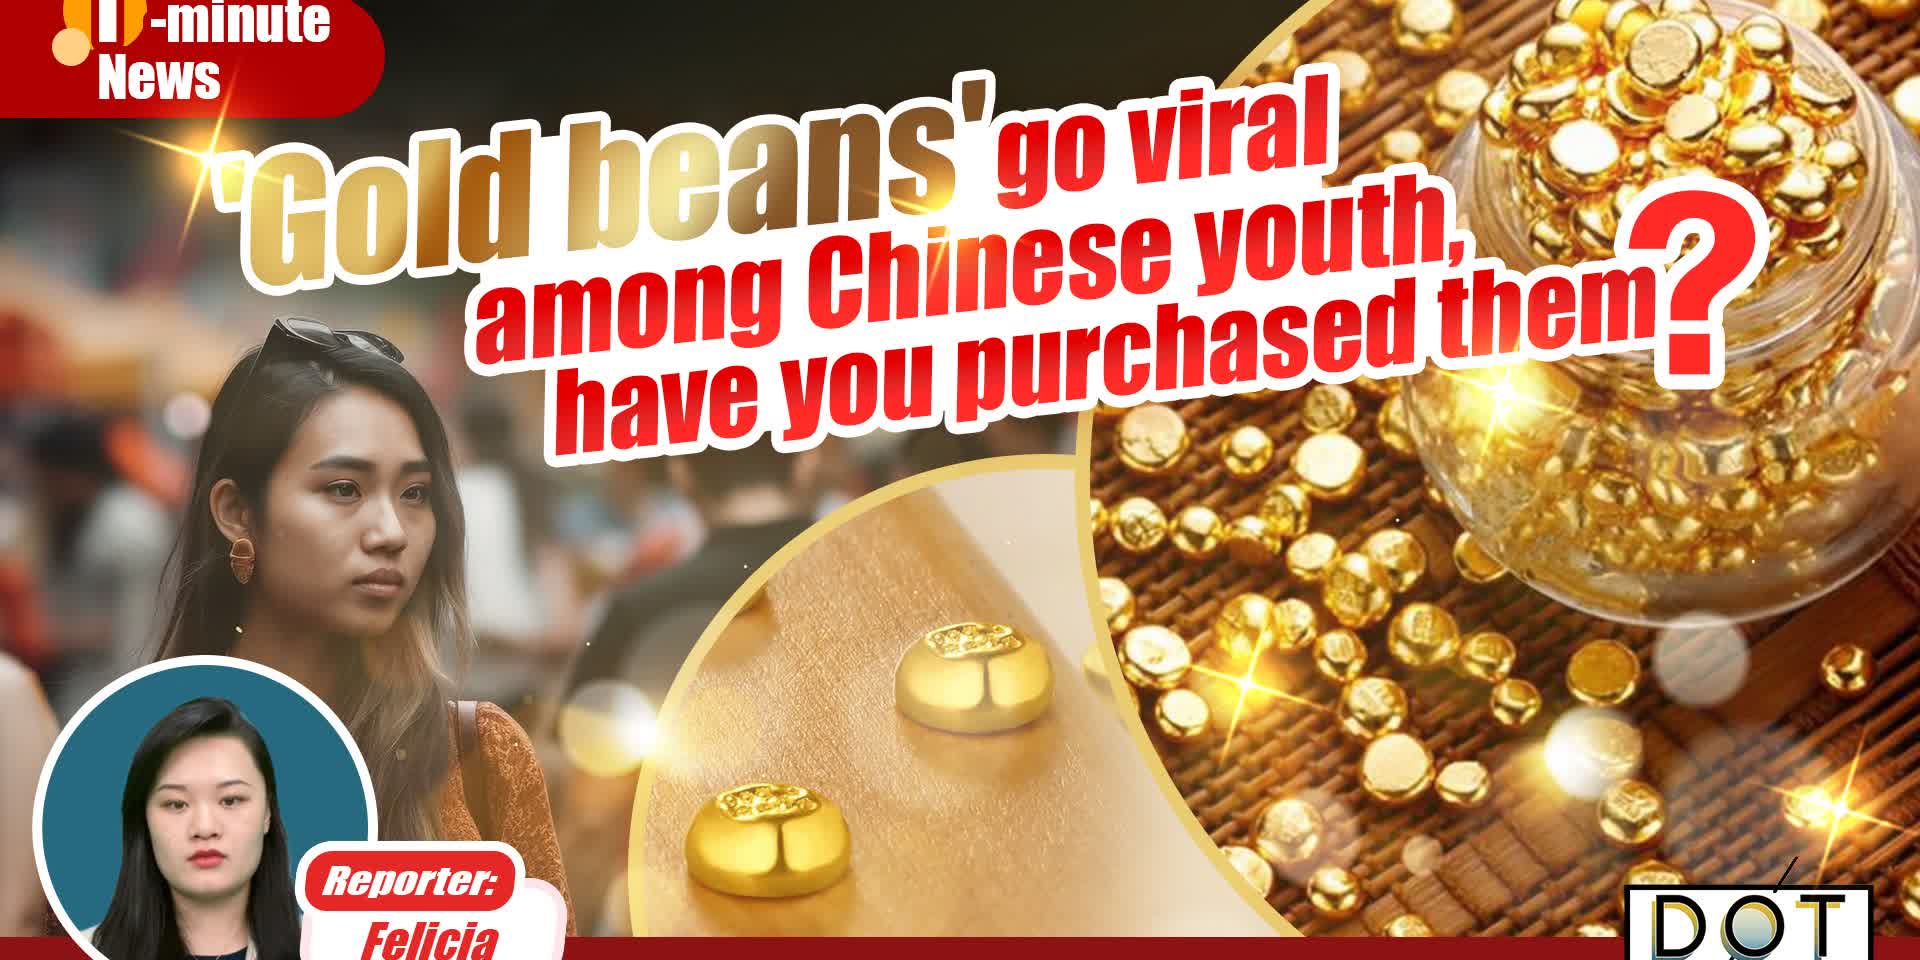 Watch This | 'Gold beans' go viral among Chinese youth, have you purchased them?